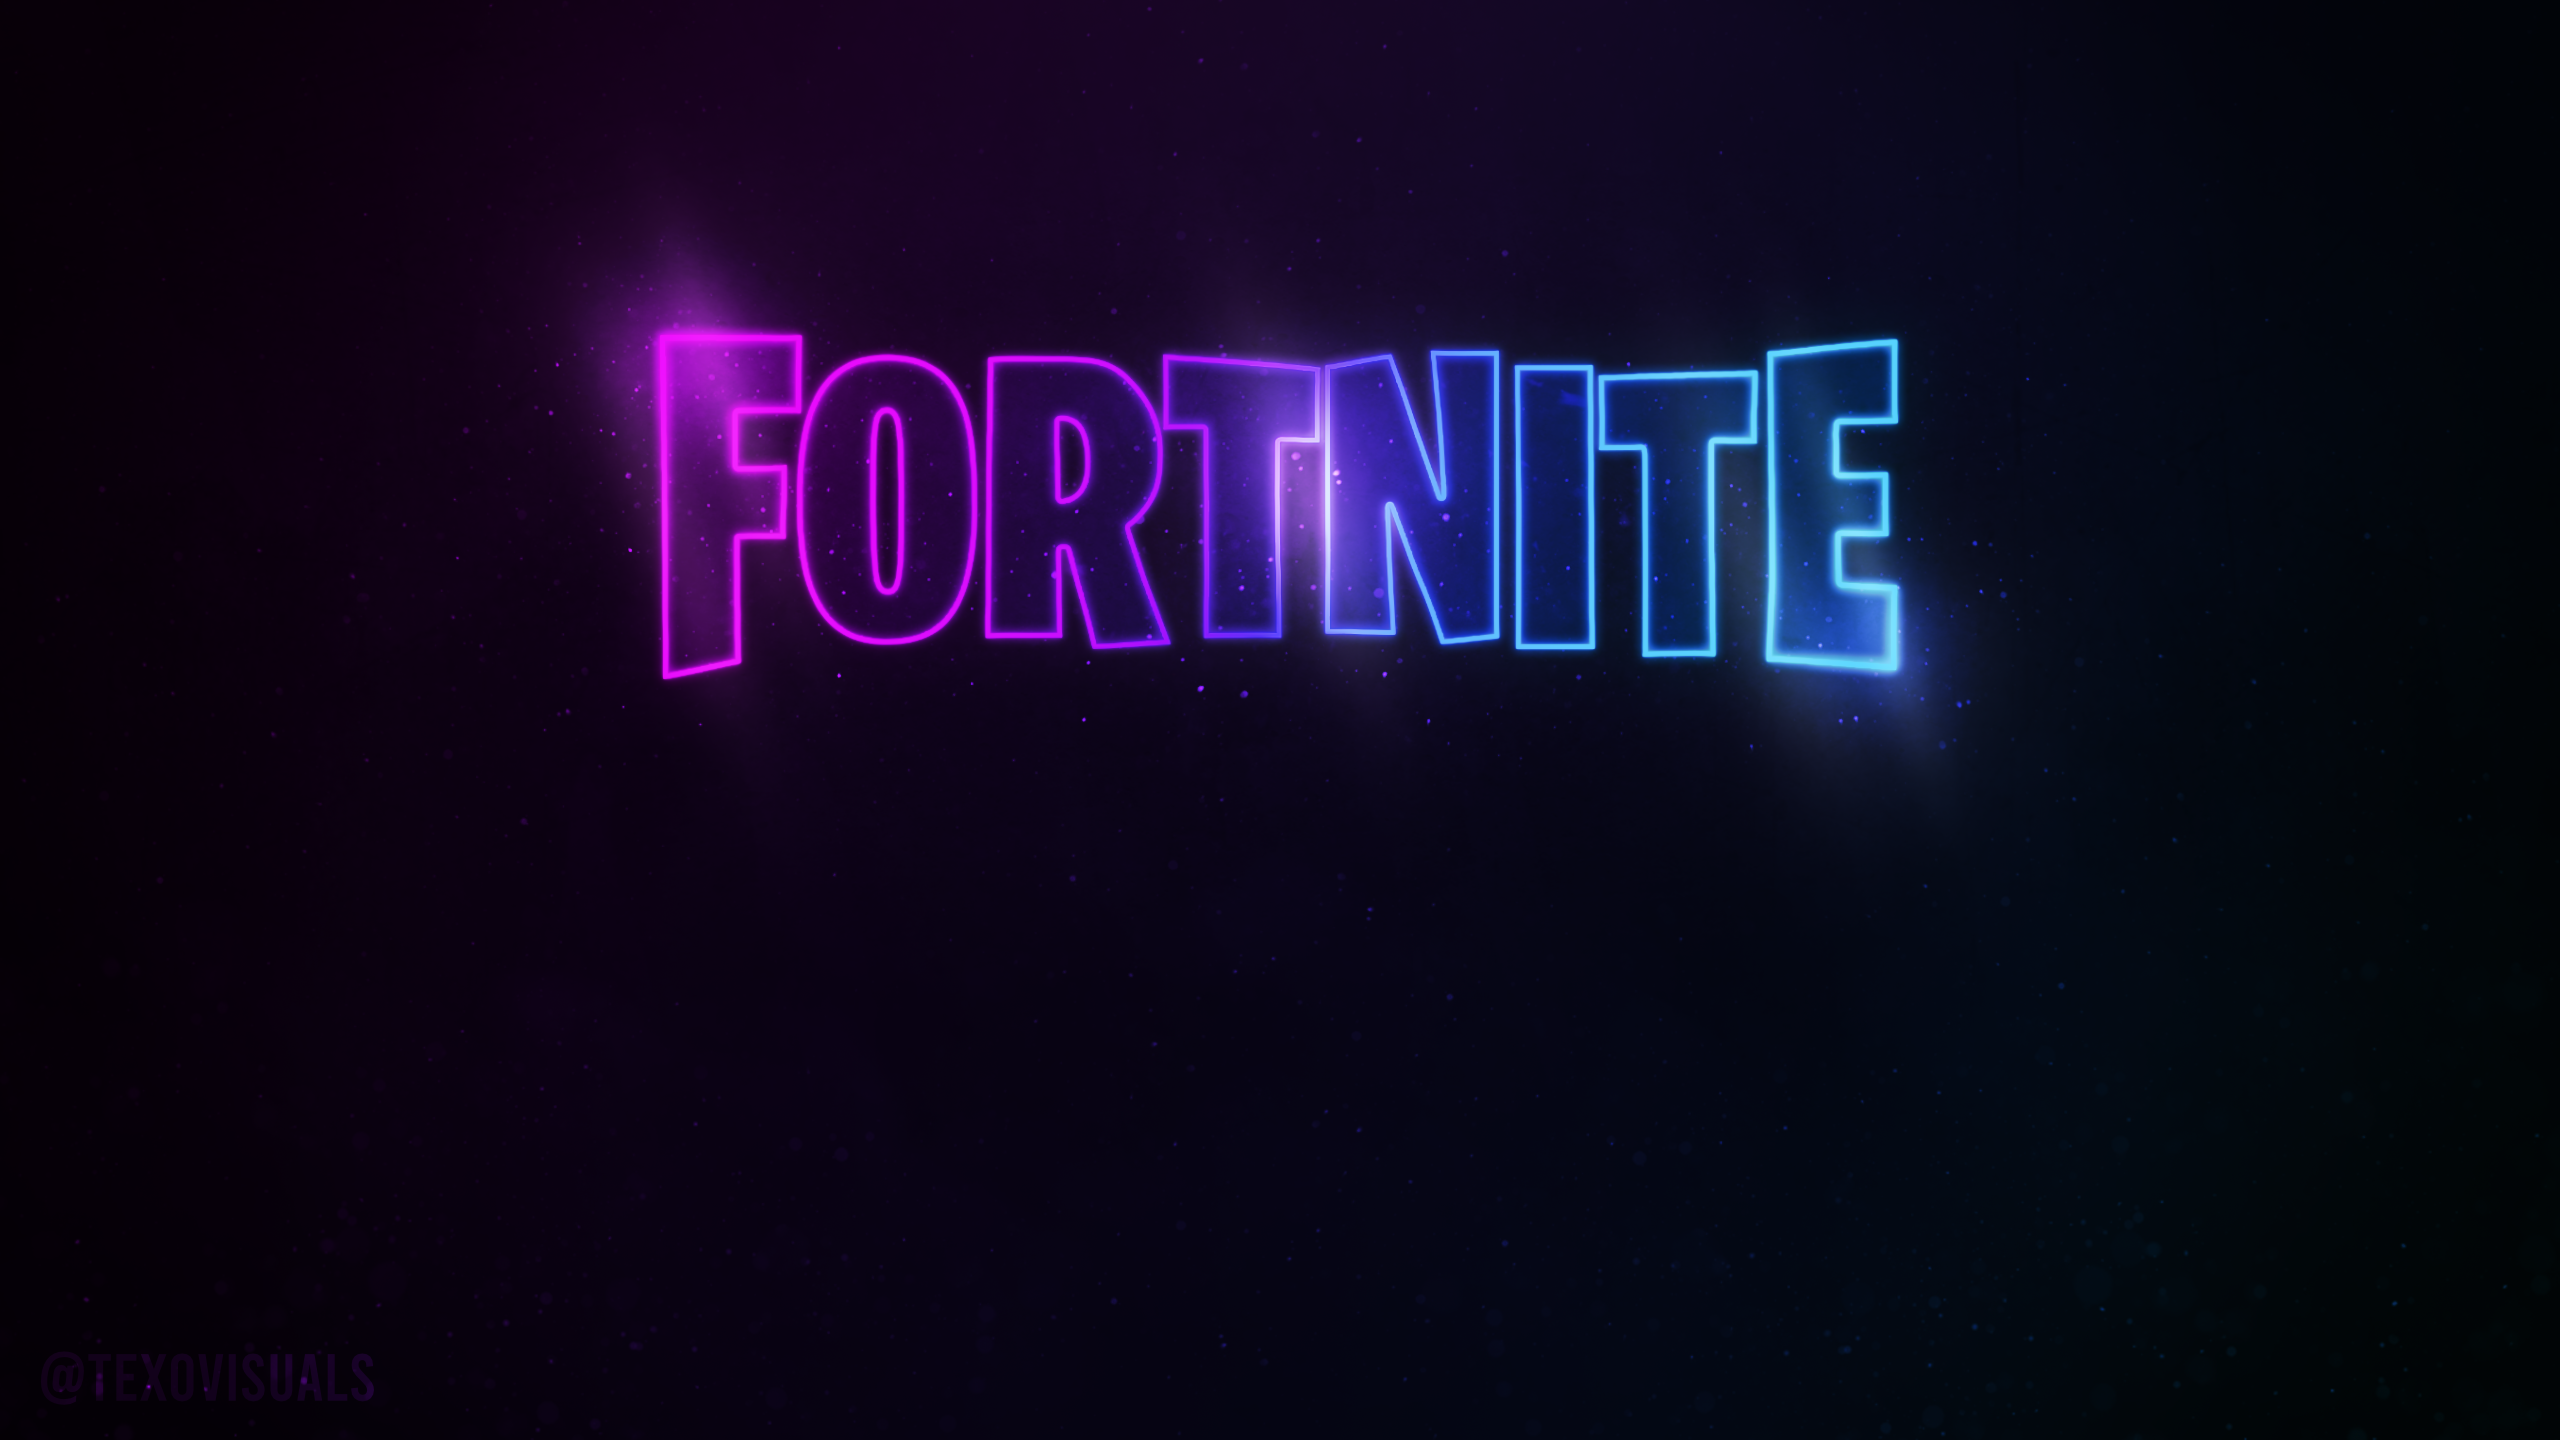 Fortnite Season 4 is Paradise  Release Date Confirmed  Dundle Magazine